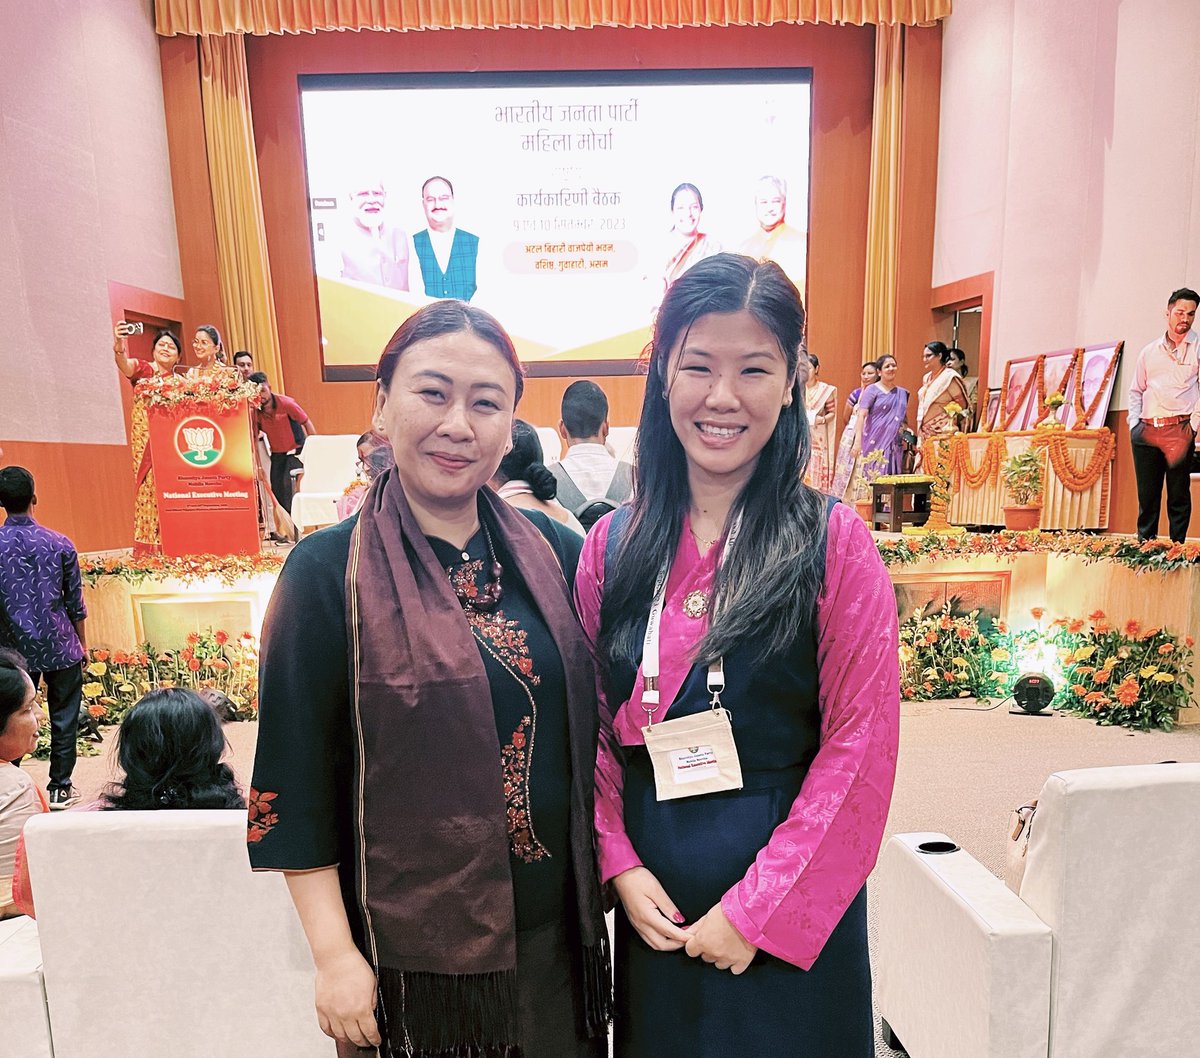 It was a wonderful experience meeting Smt. Phangnon Konyak, the first woman MP from Nagaland in Rajya Sabha. She is a woman with humility, integrity and a sense of humour and that's what makes her a great leader.
#womenempowement #womenleddevelopment #TribalCommunity